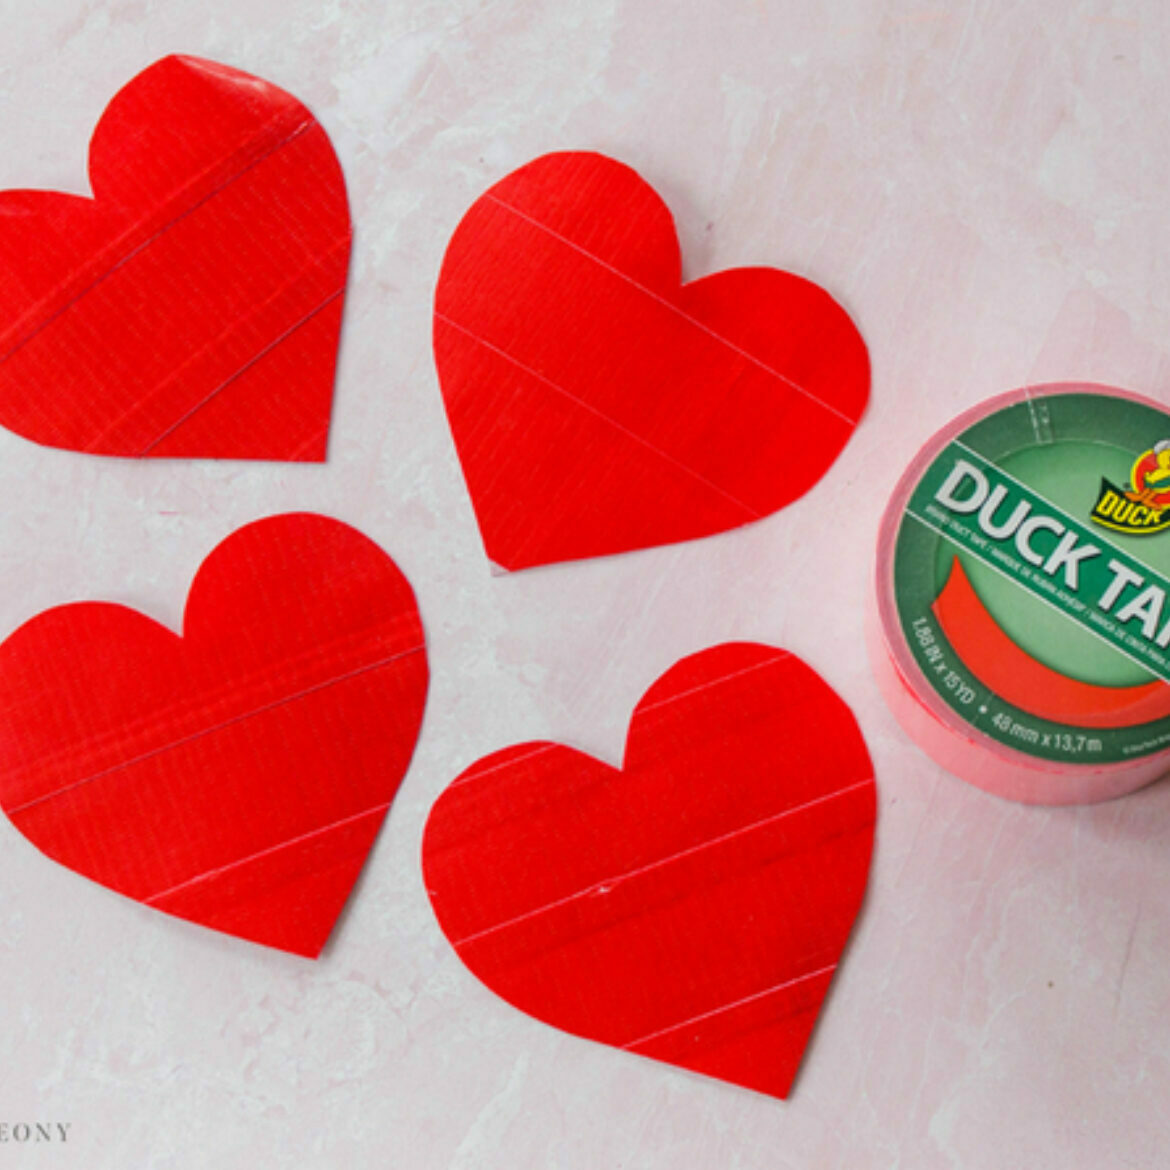 Four duct tape hearts with a roll of red duct tape